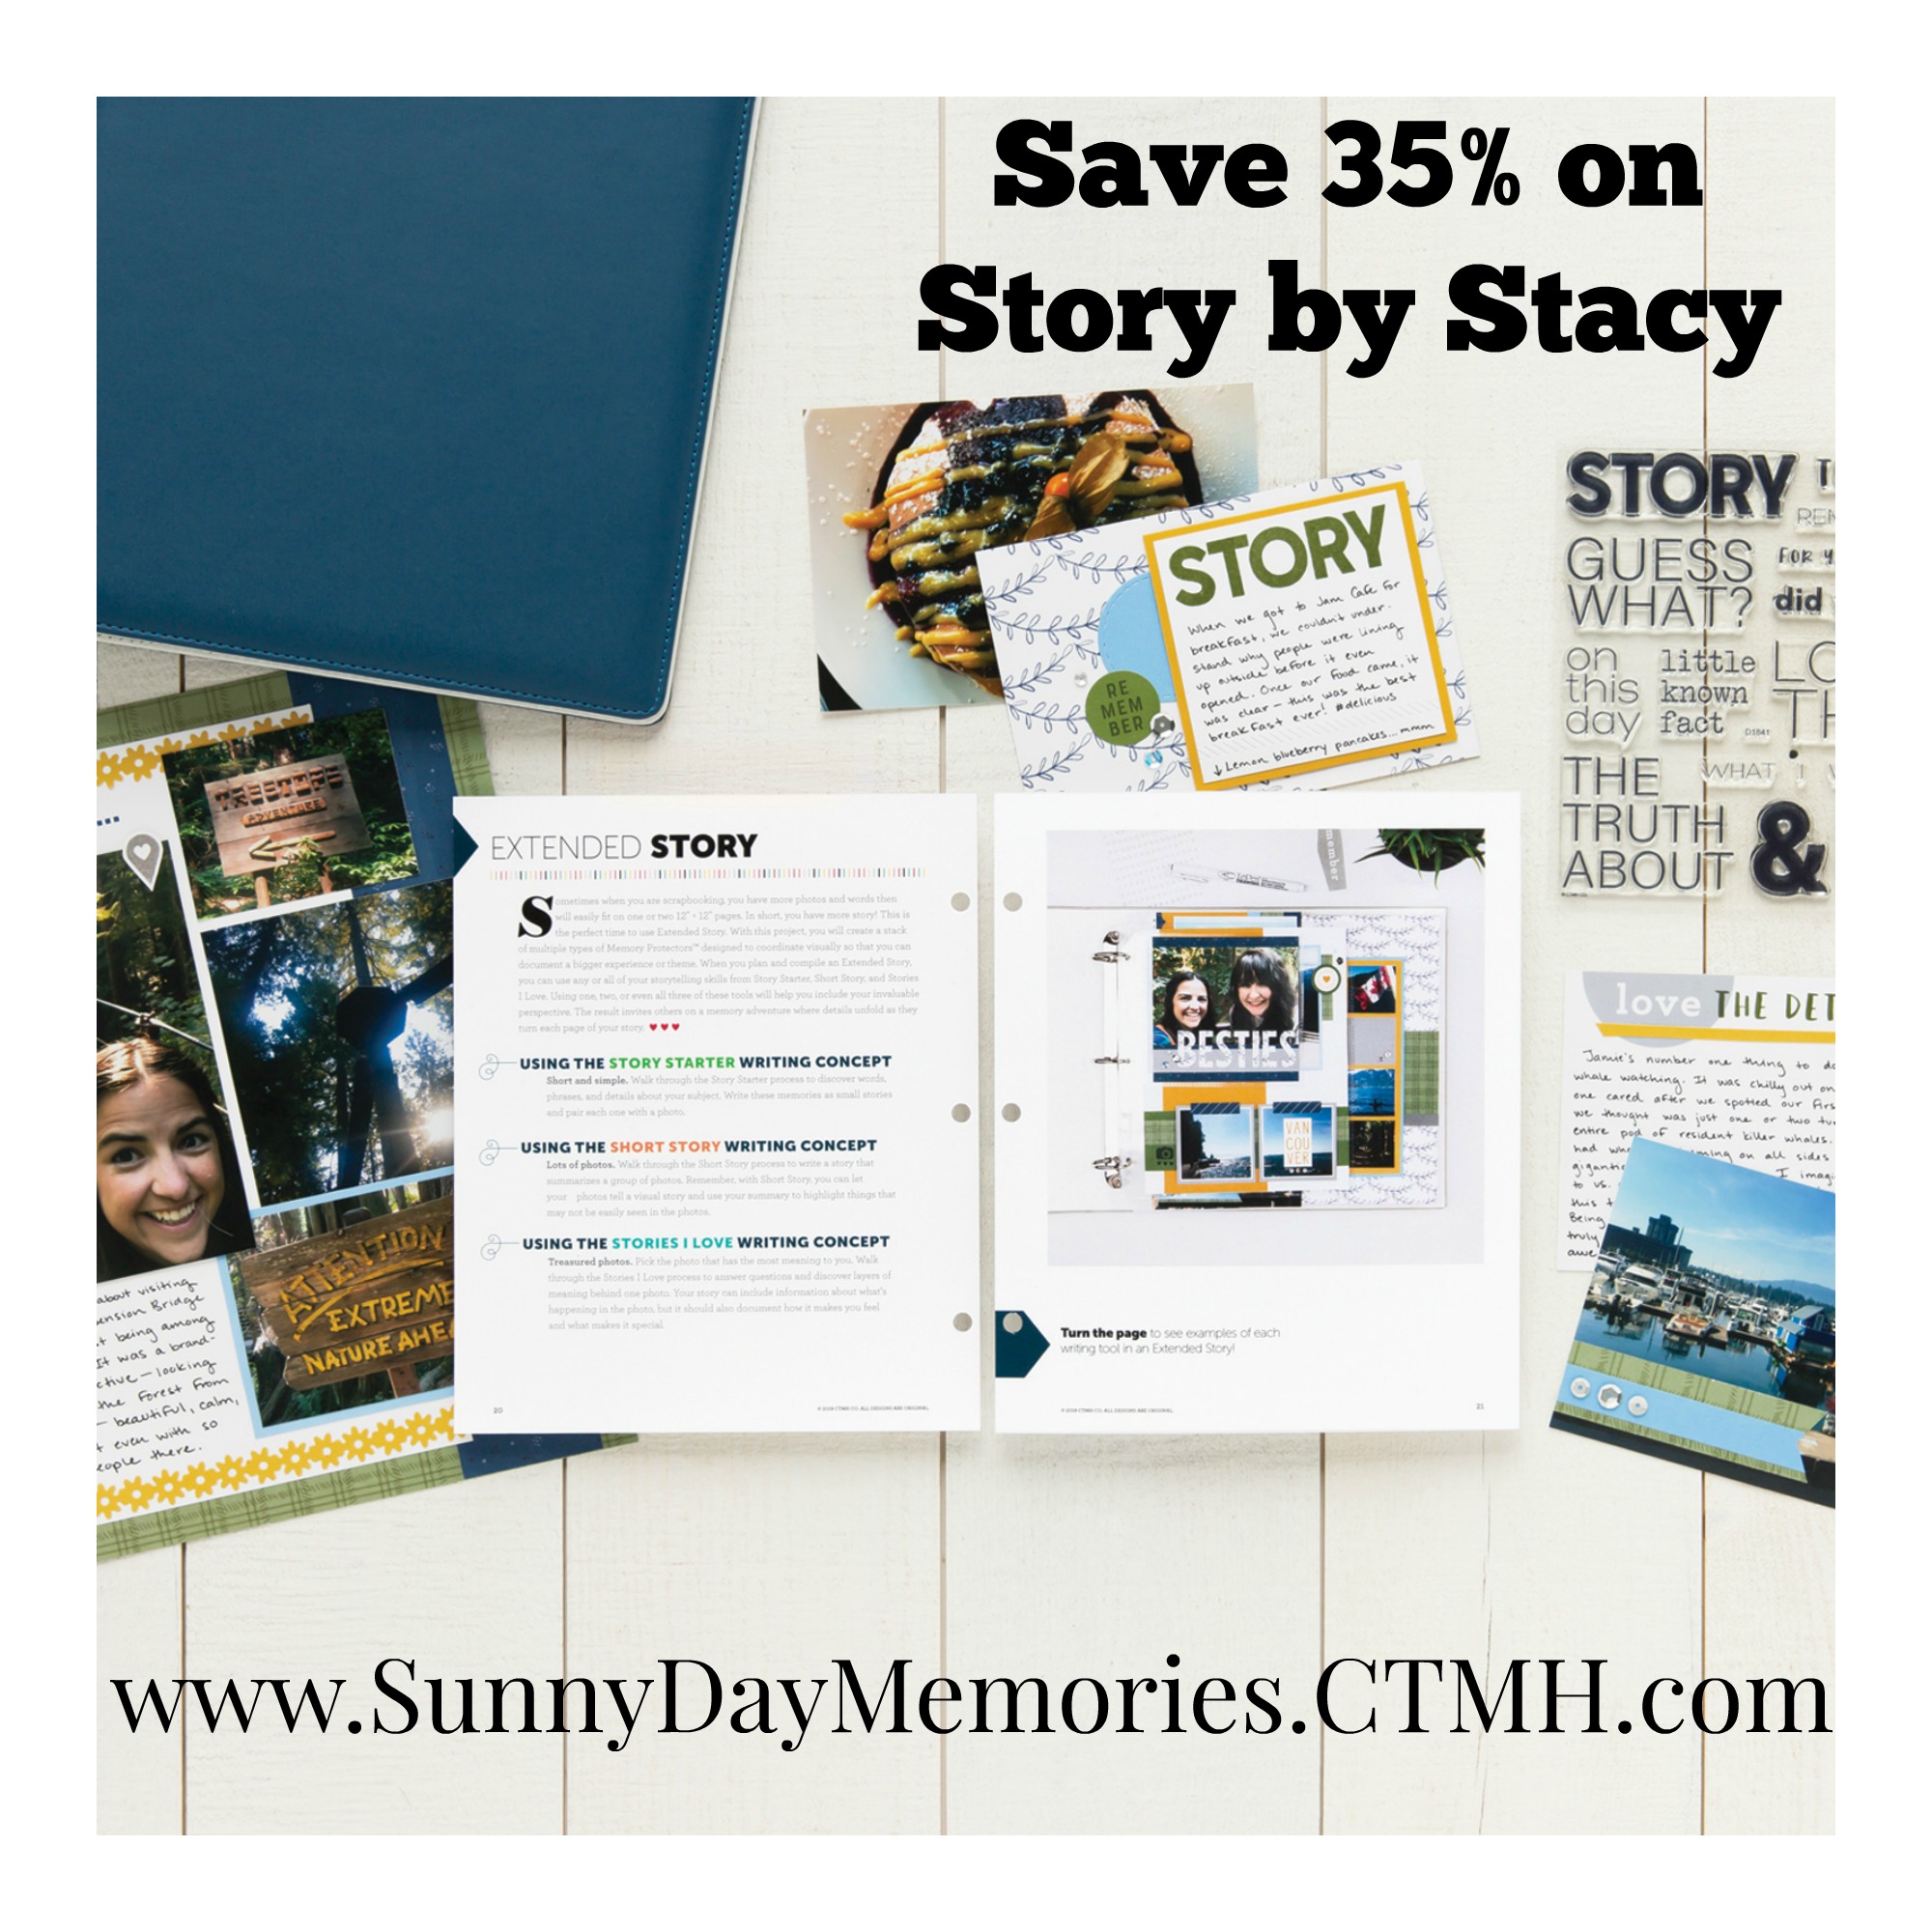 CTMH Story by Stacy Anniversary Special